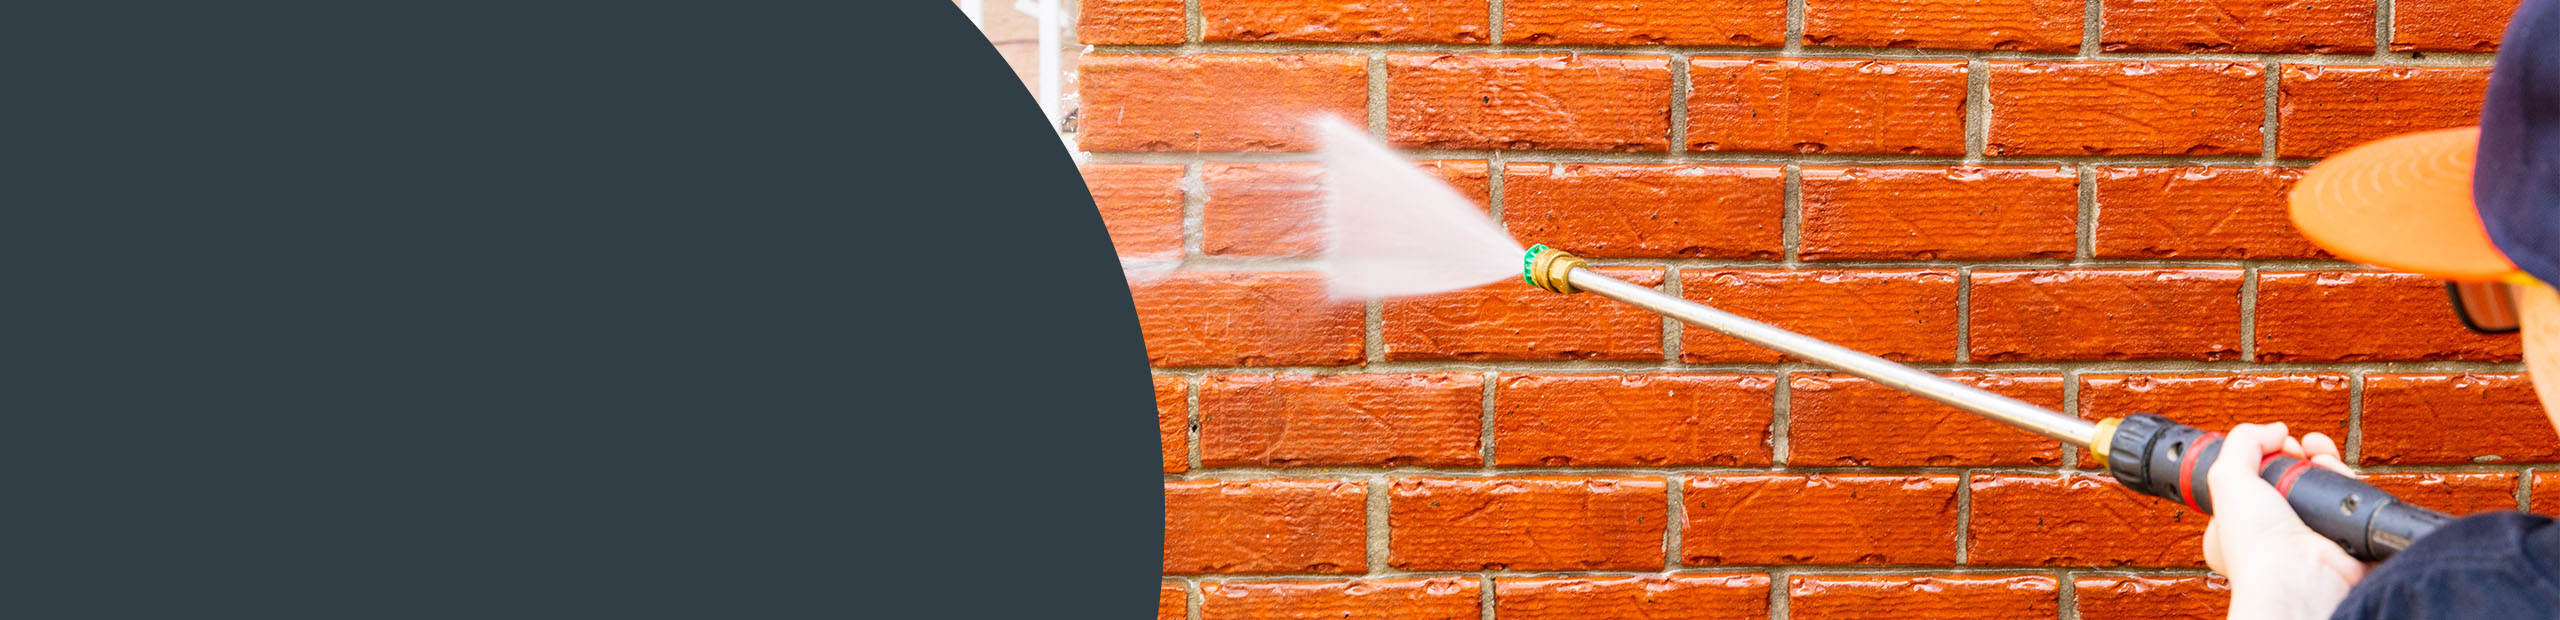 Brick Cleaning Services Westerham